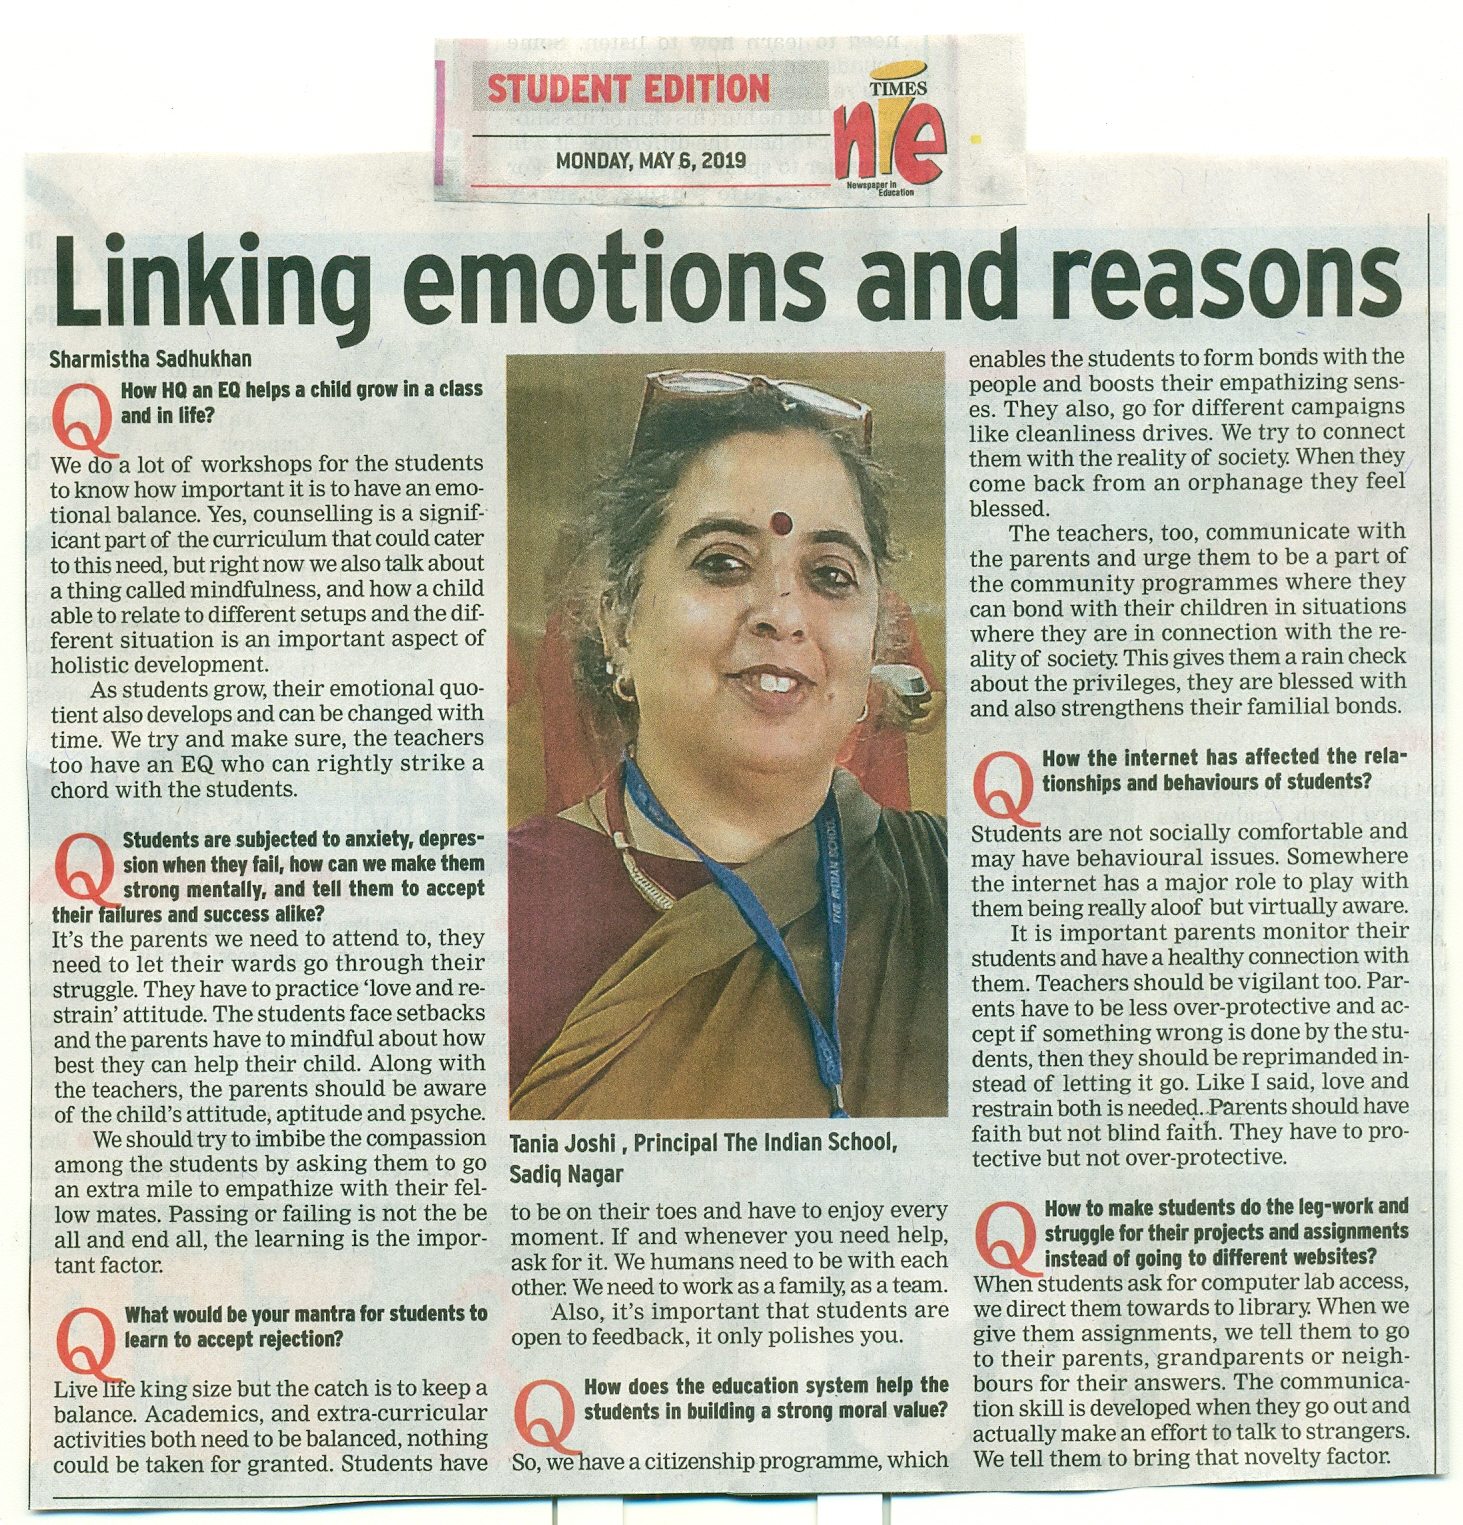 TIMES OF INDIA, MONDAY, 06 MAY 2019